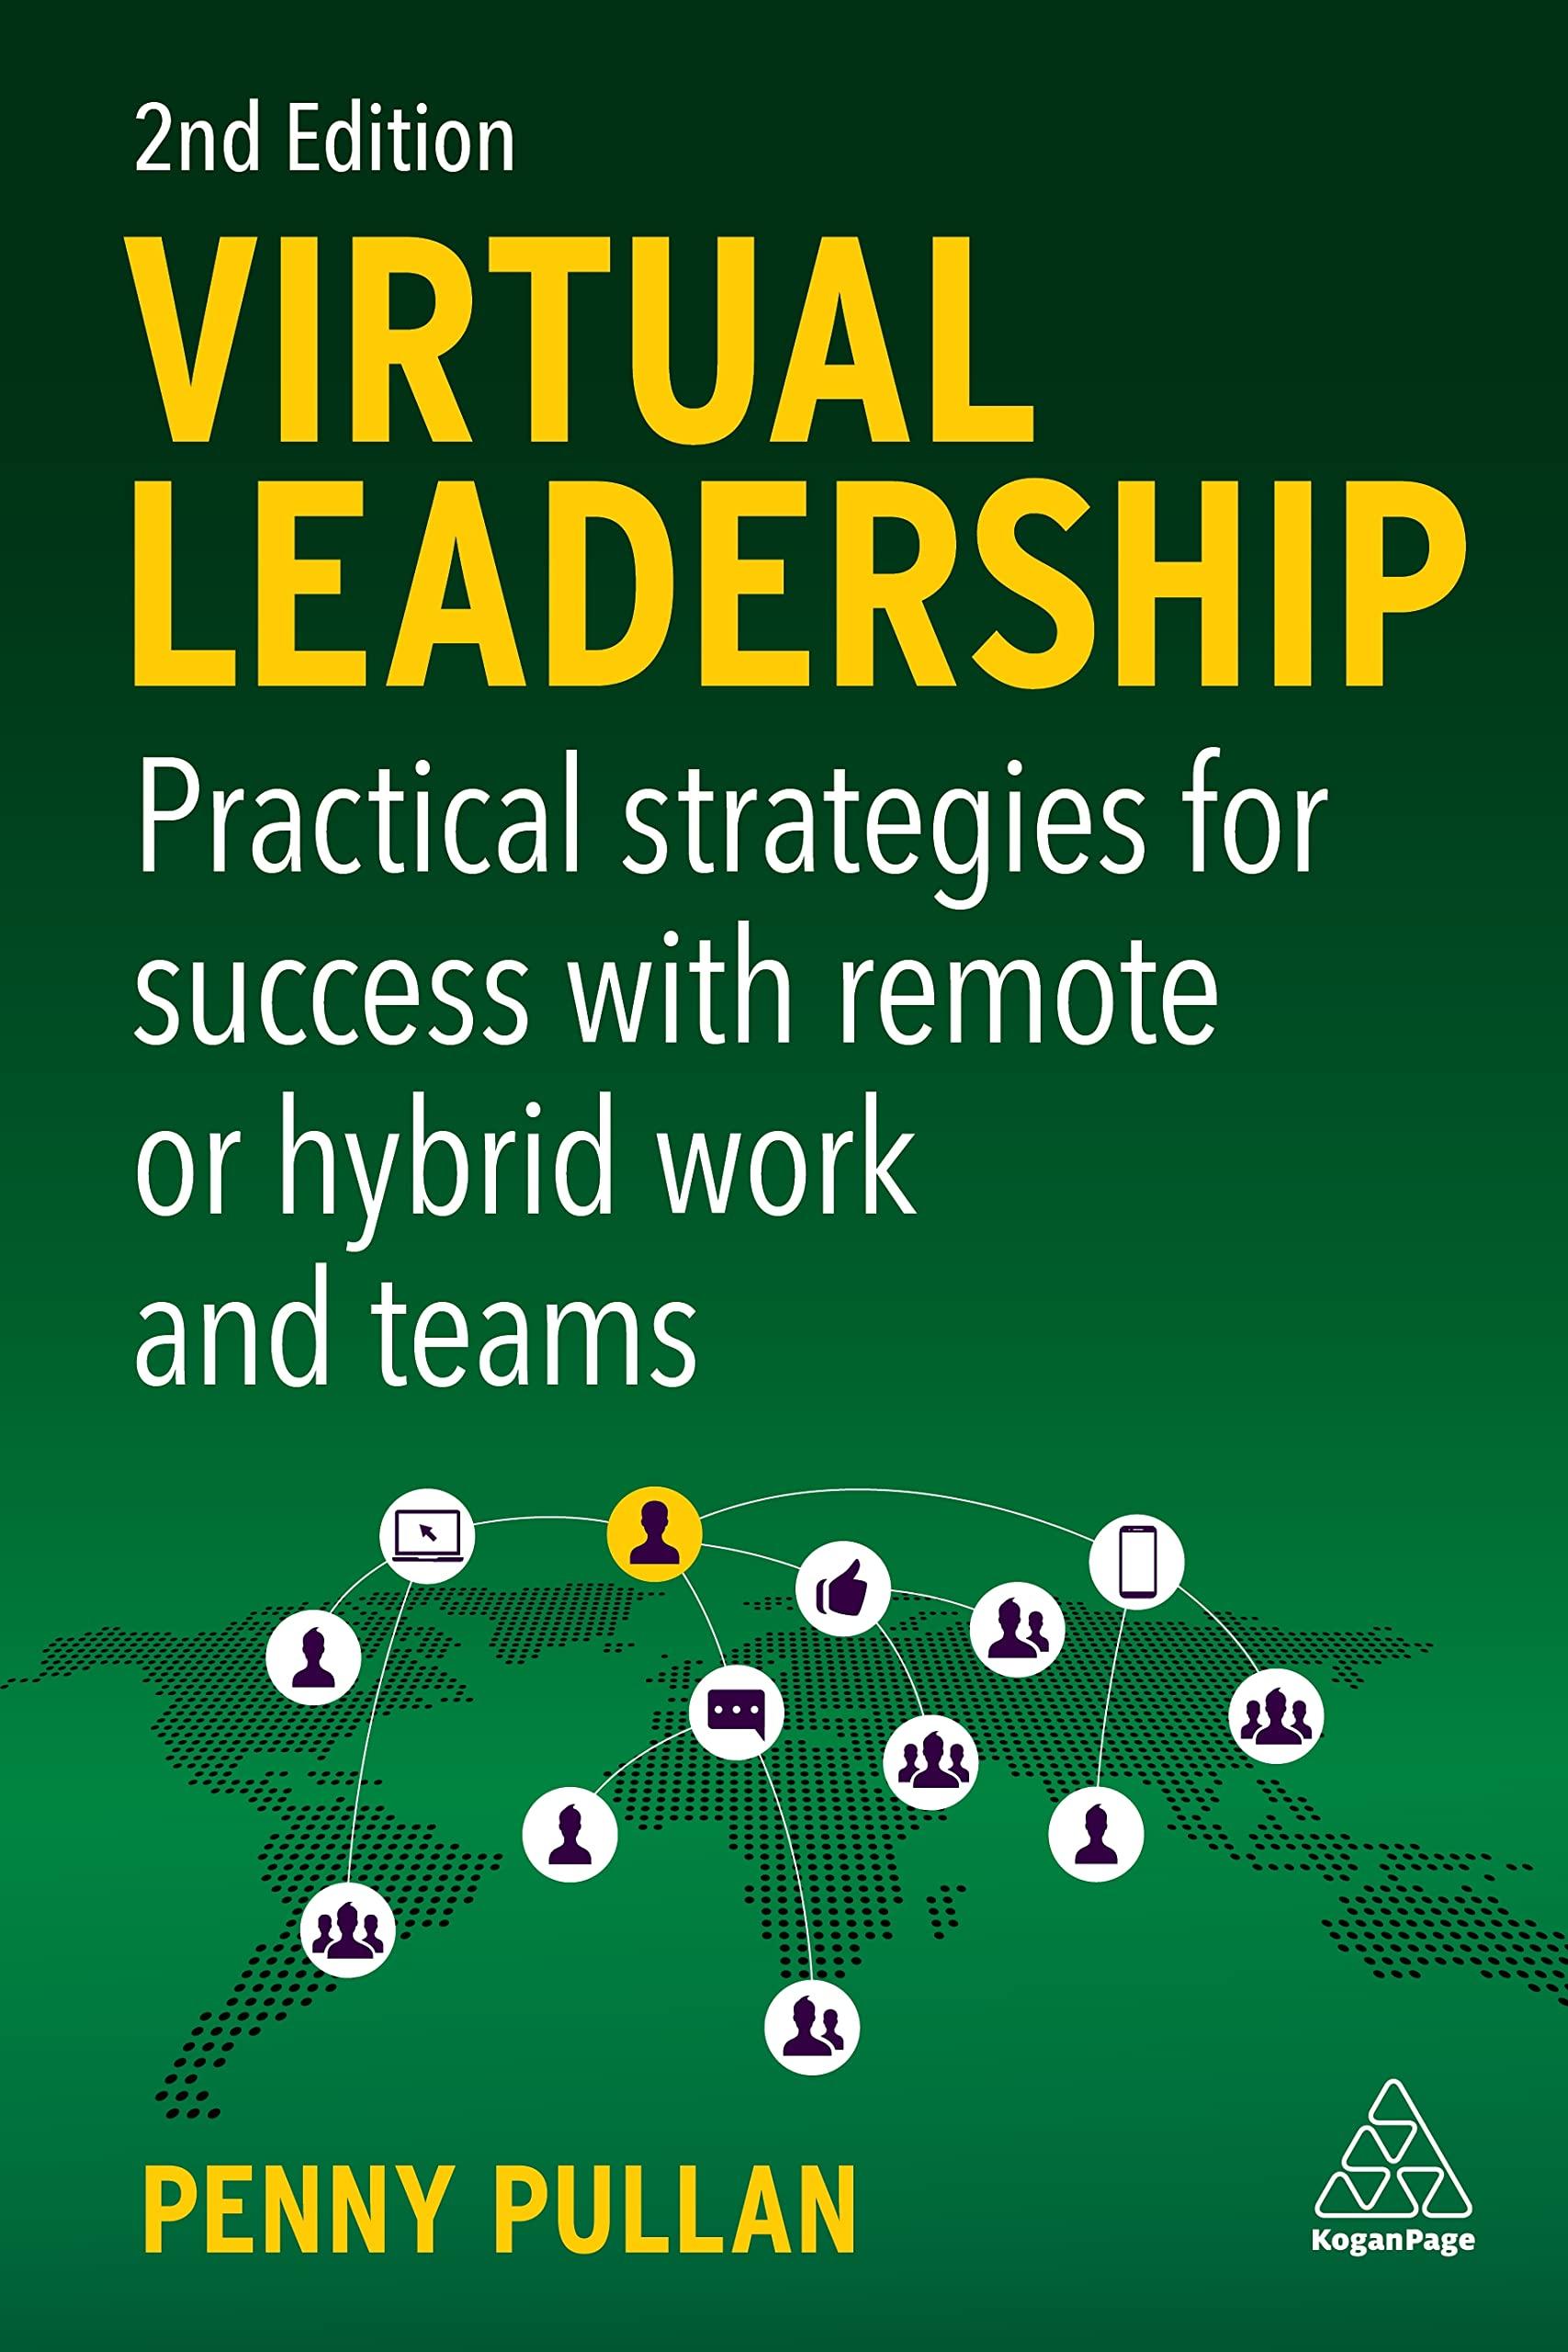 virtual leadership practical strategies for success with remote or hybrid work and teams 2nd edition penny